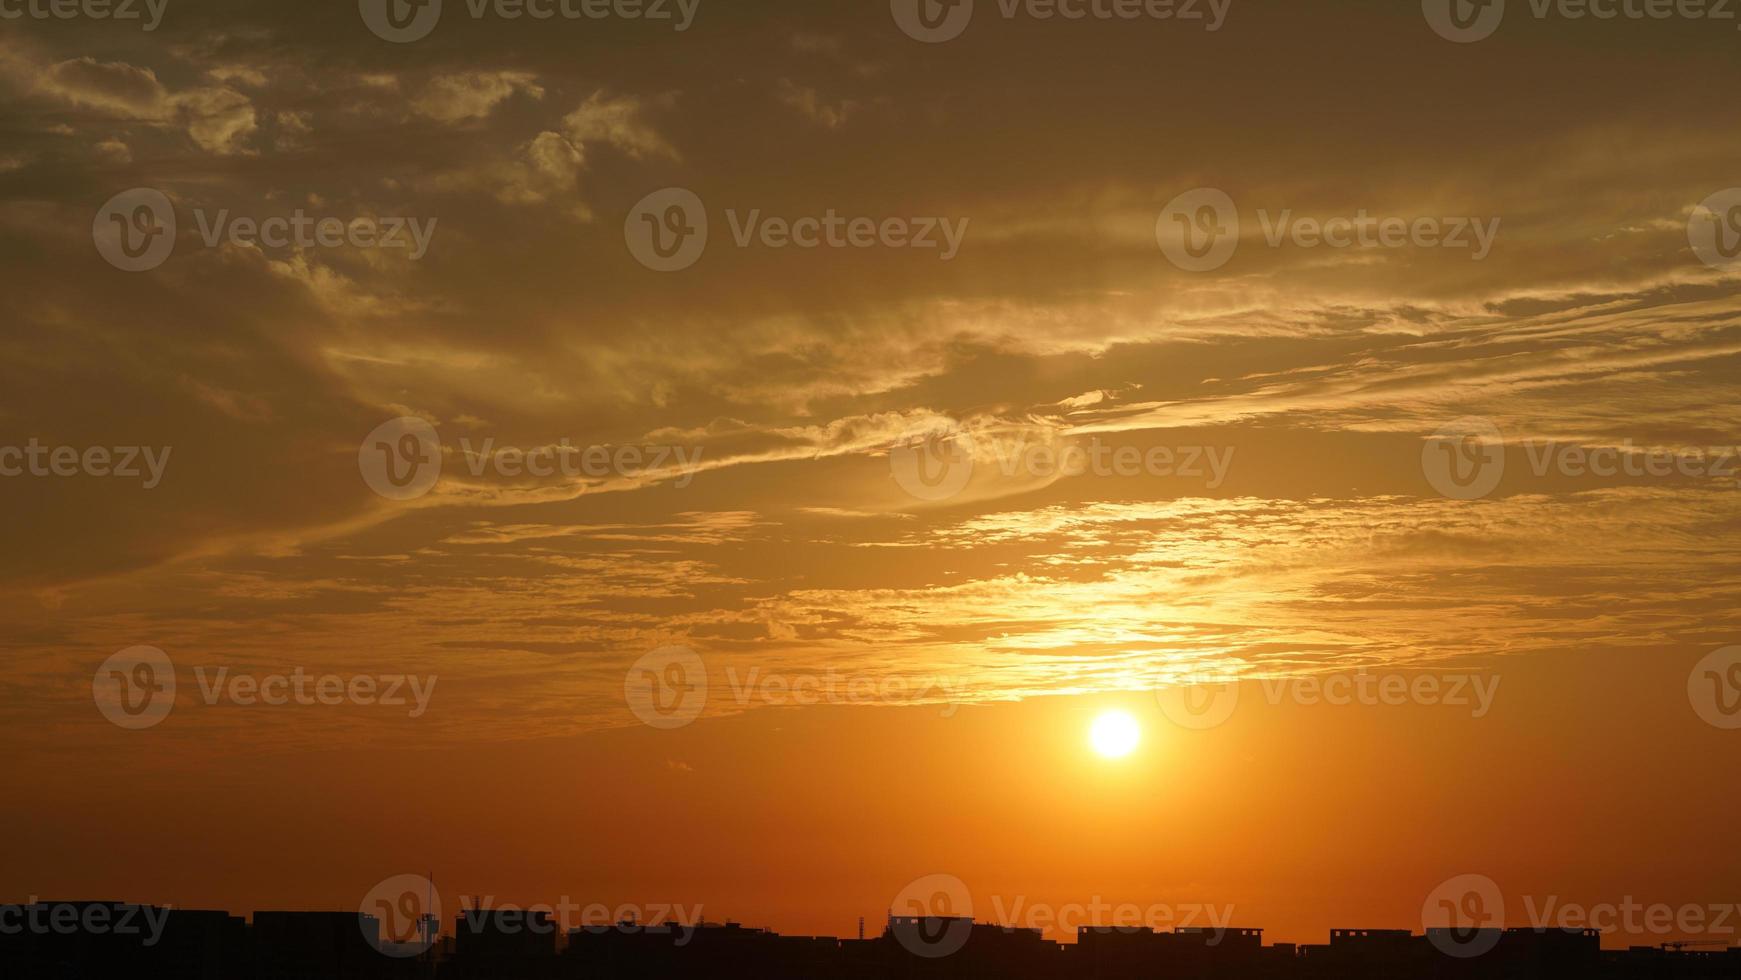 The beautiful sunset sky view with the colorful clouds and warm lights in the sky photo